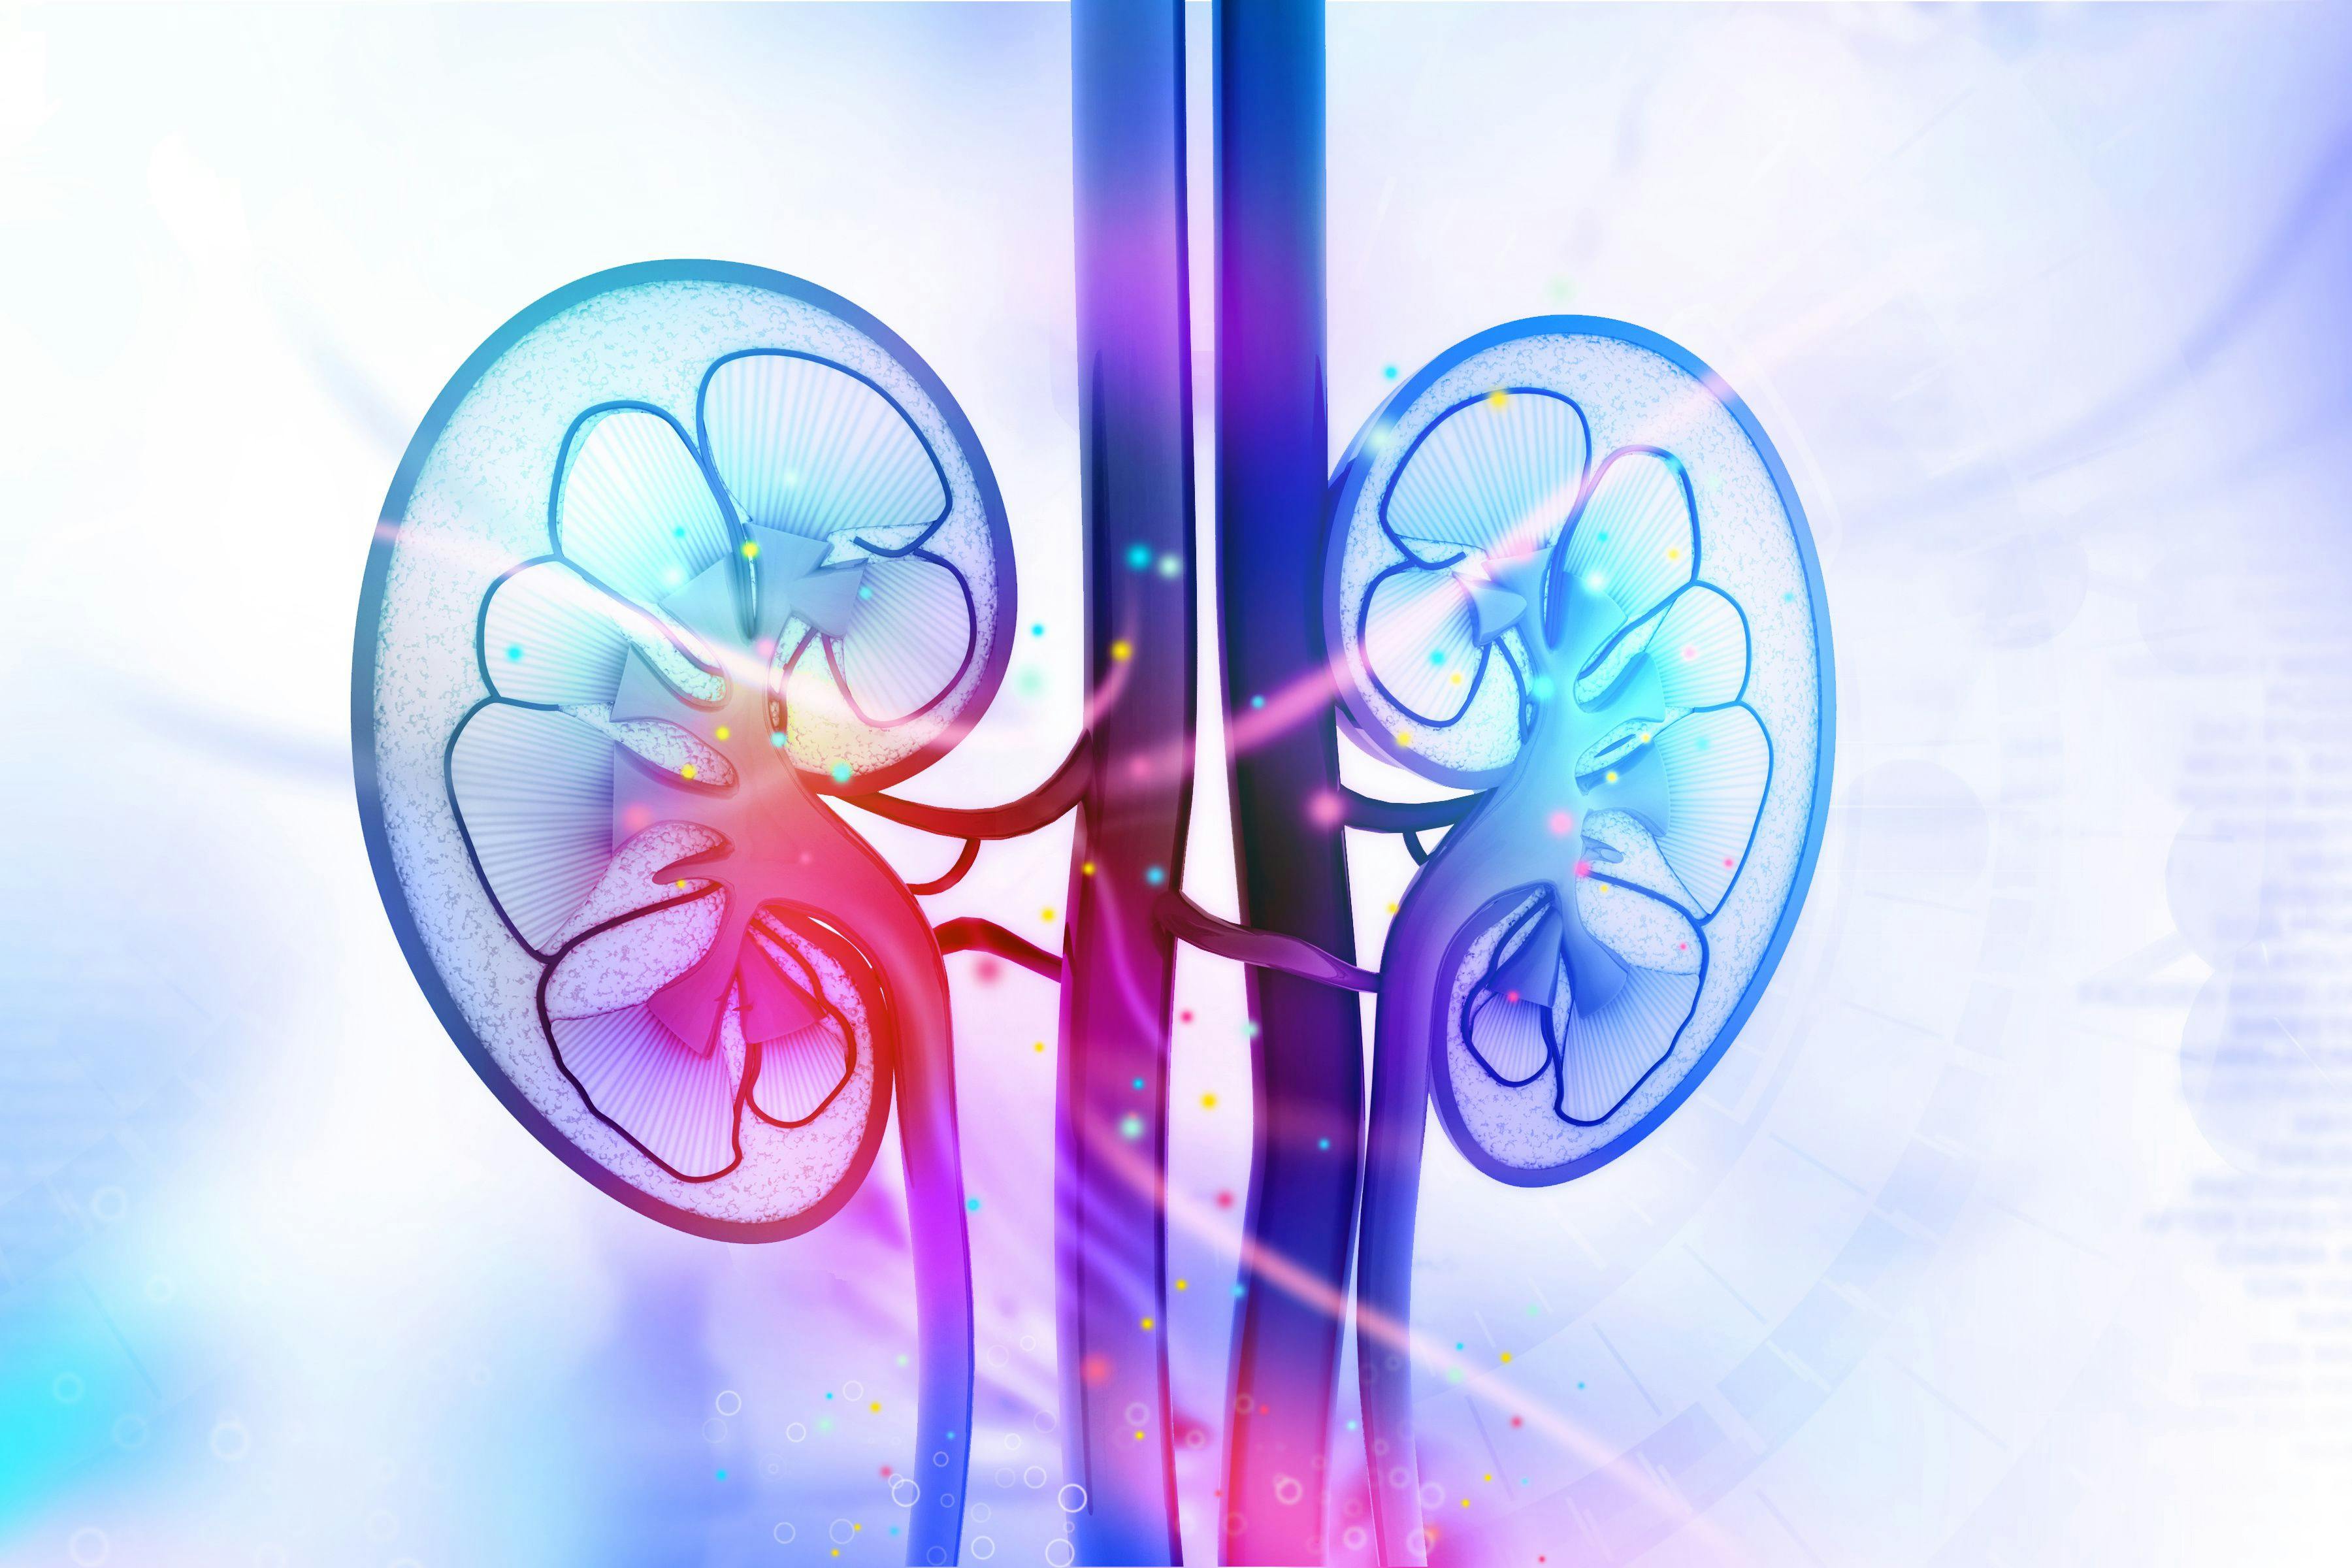 Study Describes Early Benefit, Effectiveness of RASi for CKD